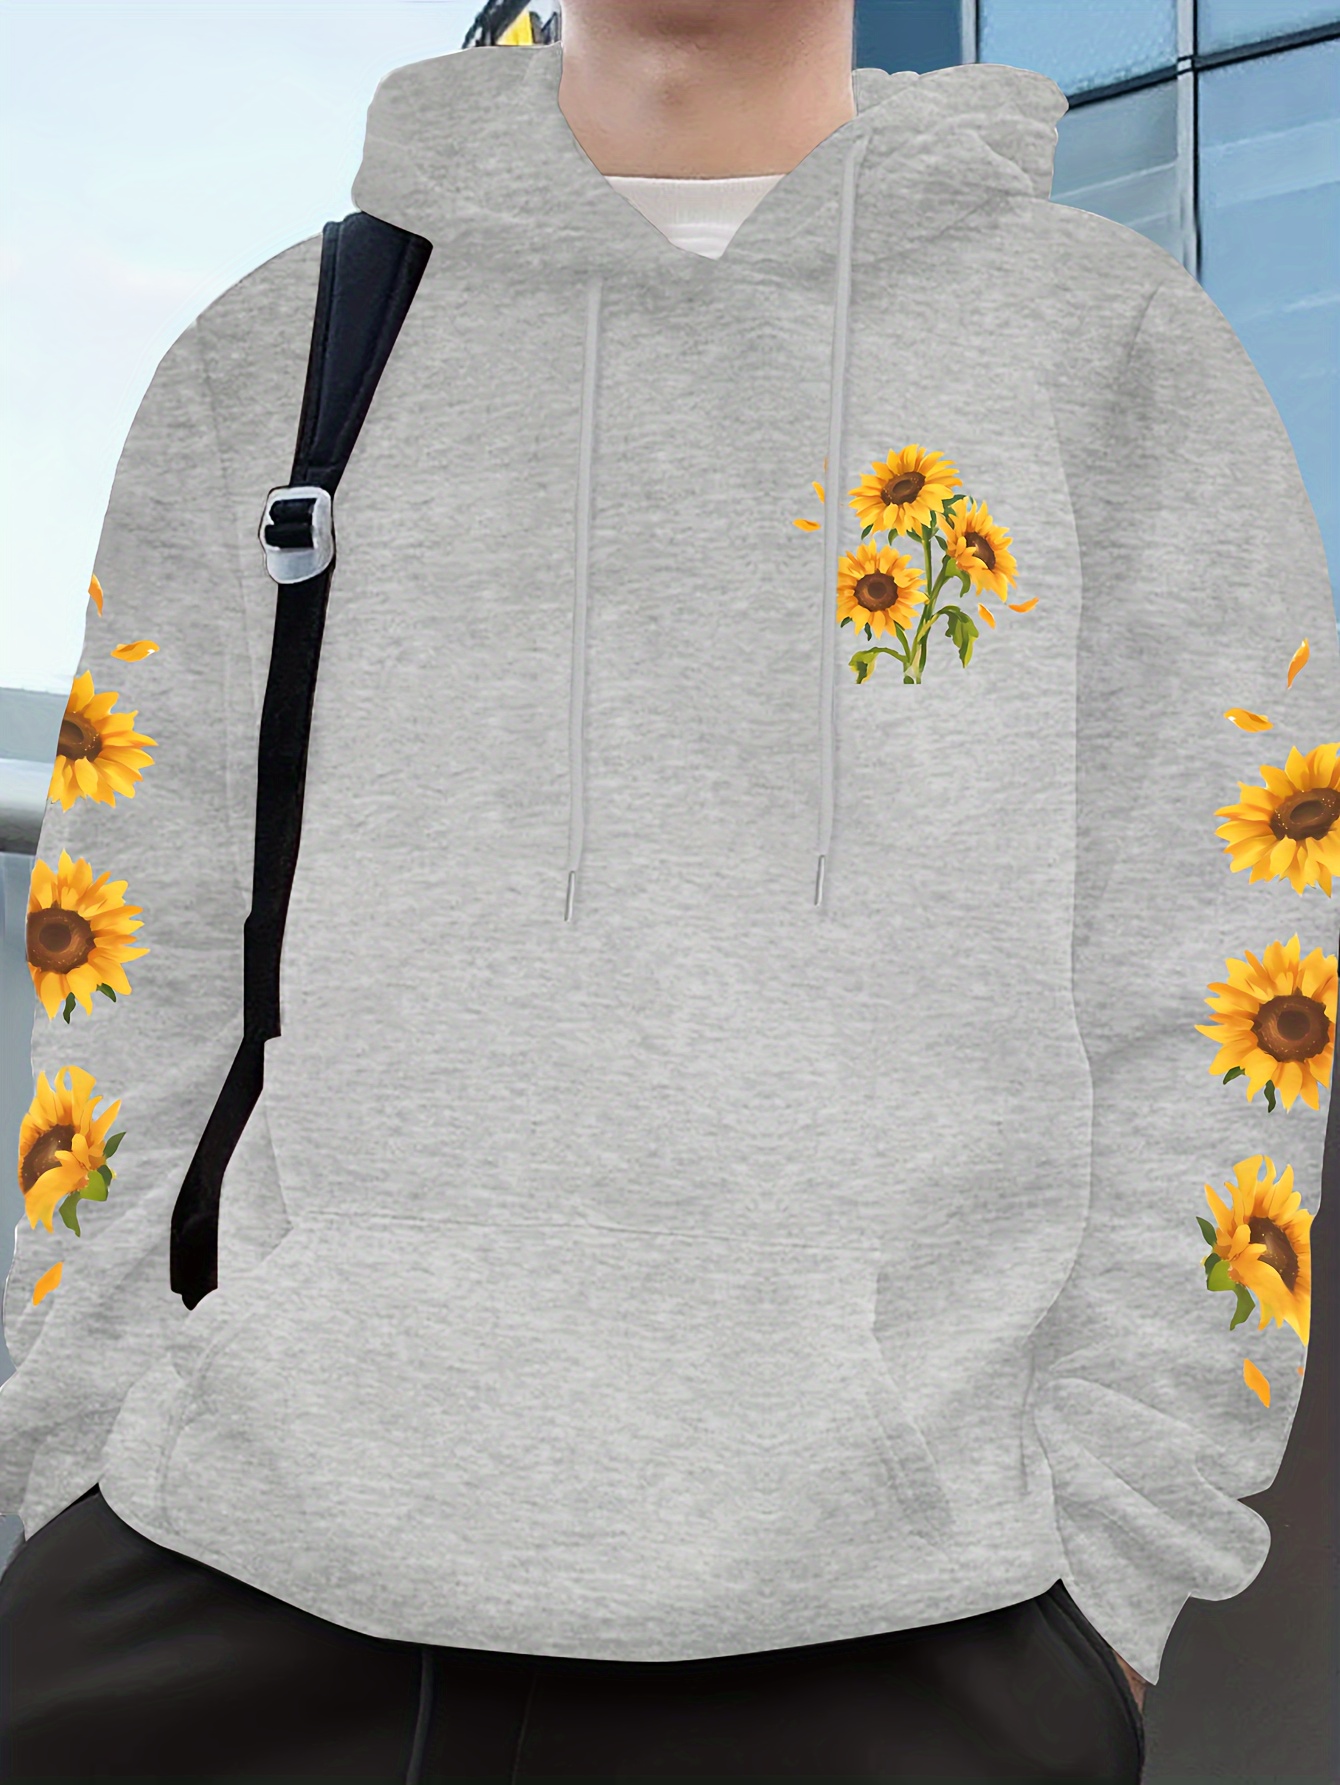 sunflower print mens pullover round neck hoodies with kangaroo pocket long sleeve hooded sweatshirt loose casual top for autumn winter mens clothing as gifts details 25